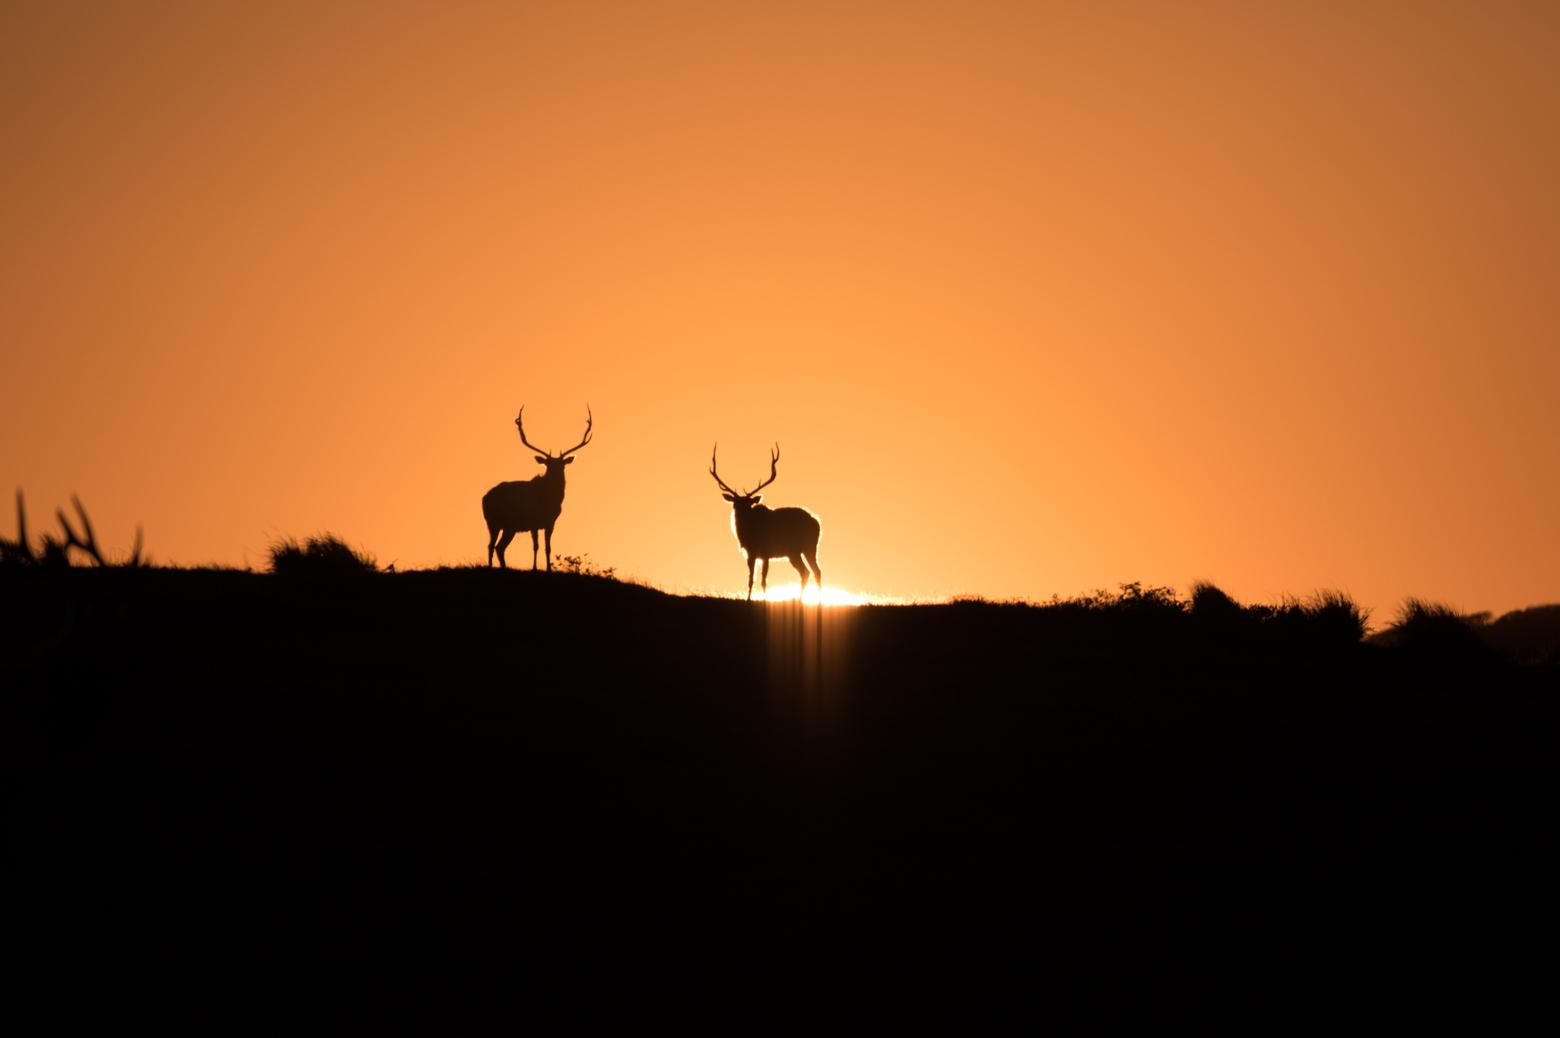 Tule elk captured in the golden hour at Point Reyes National Seashore. Photo courtesy of Ken Bouley